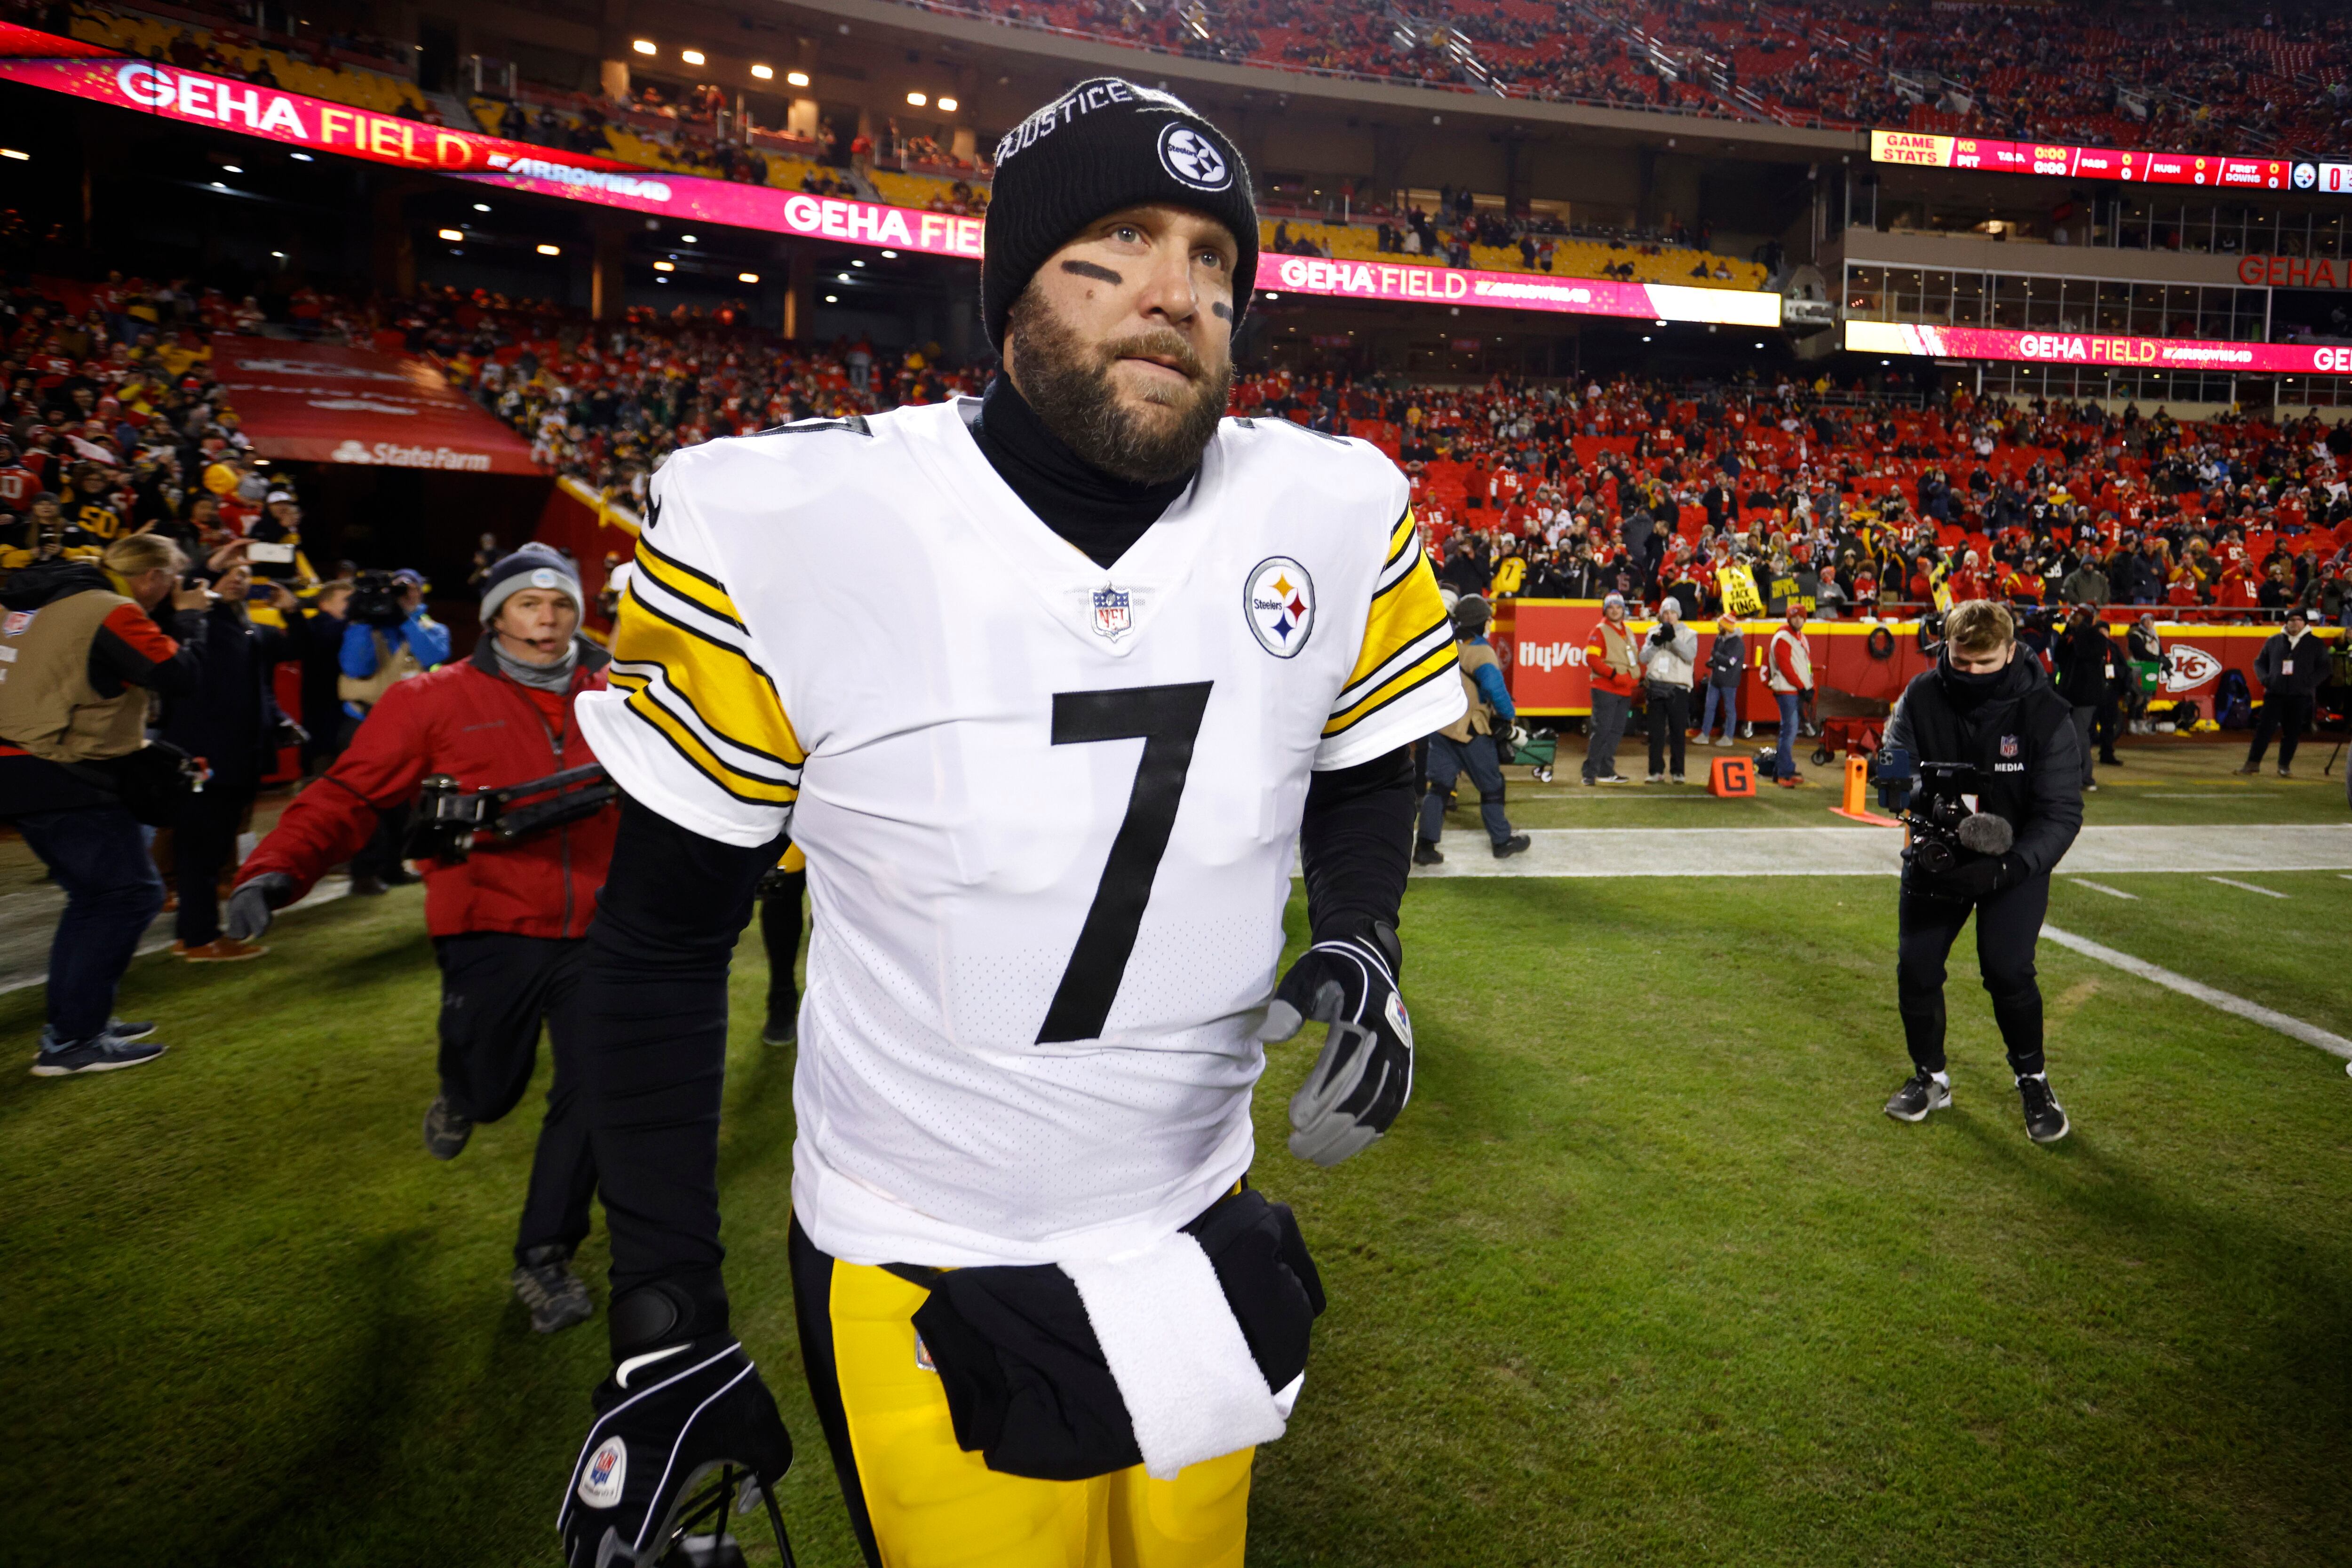 Roethlisberger retires at 39: Time to 'hang up my cleats'